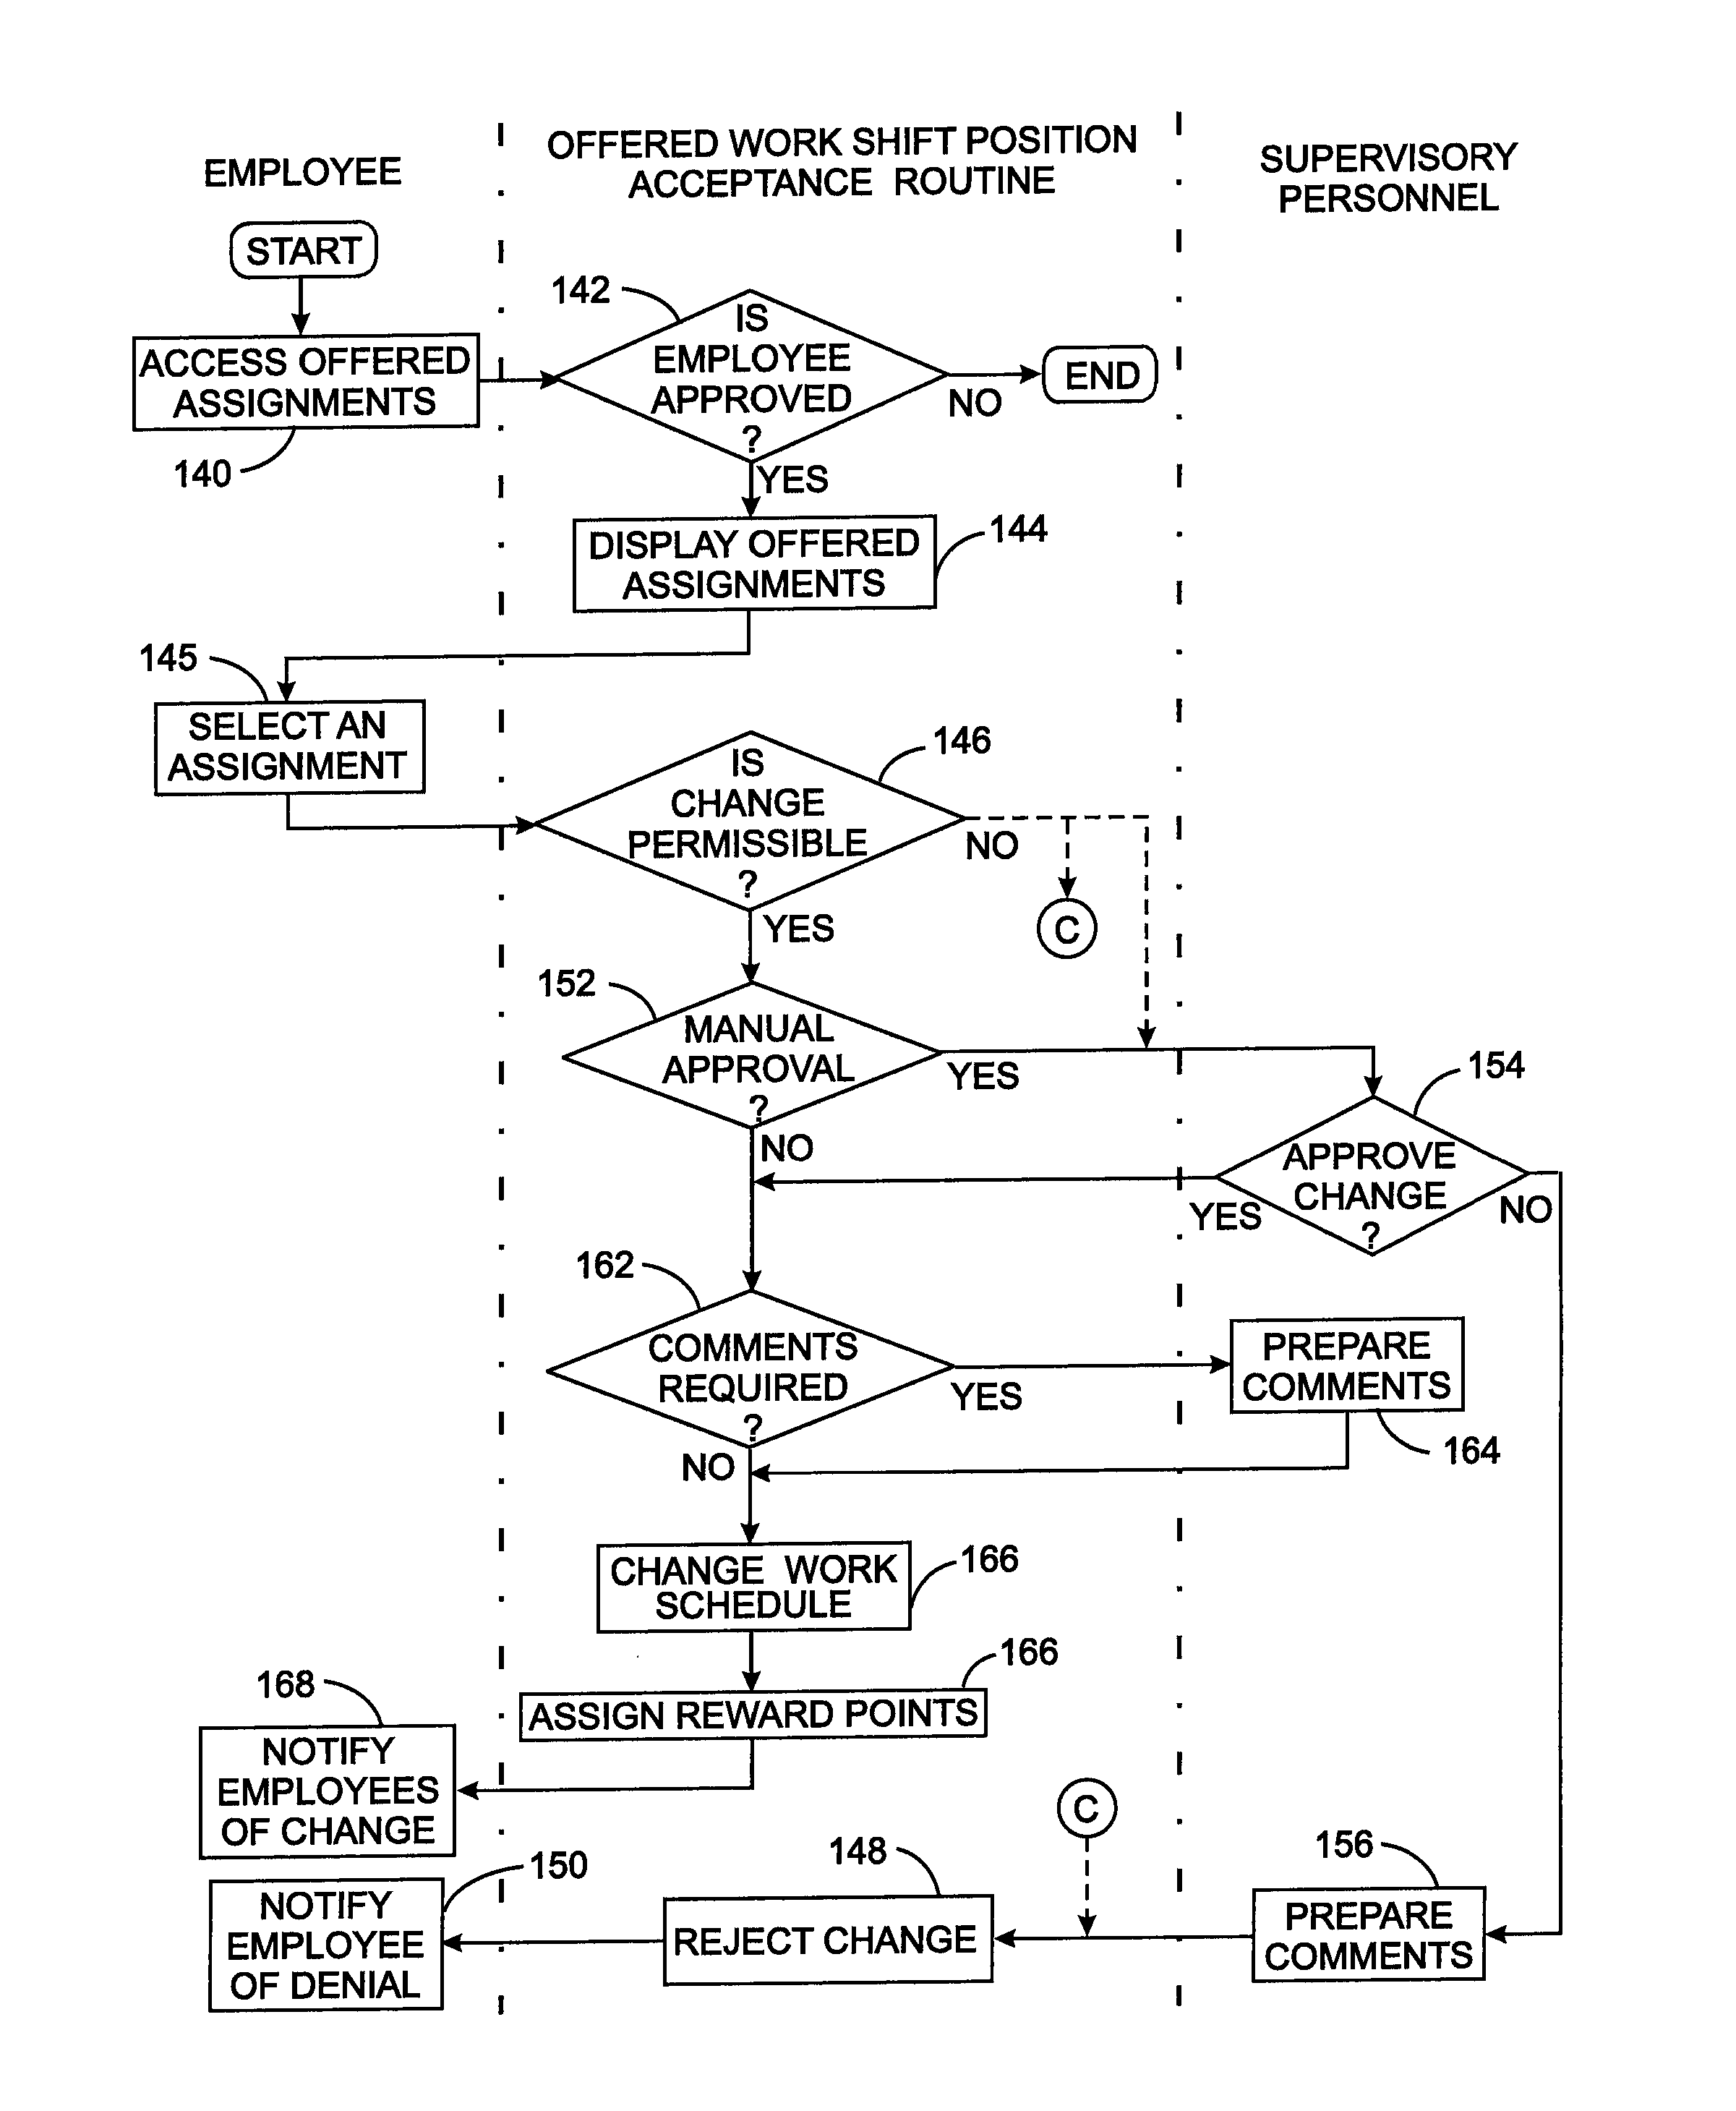 Automated auction method for staffing work shifts